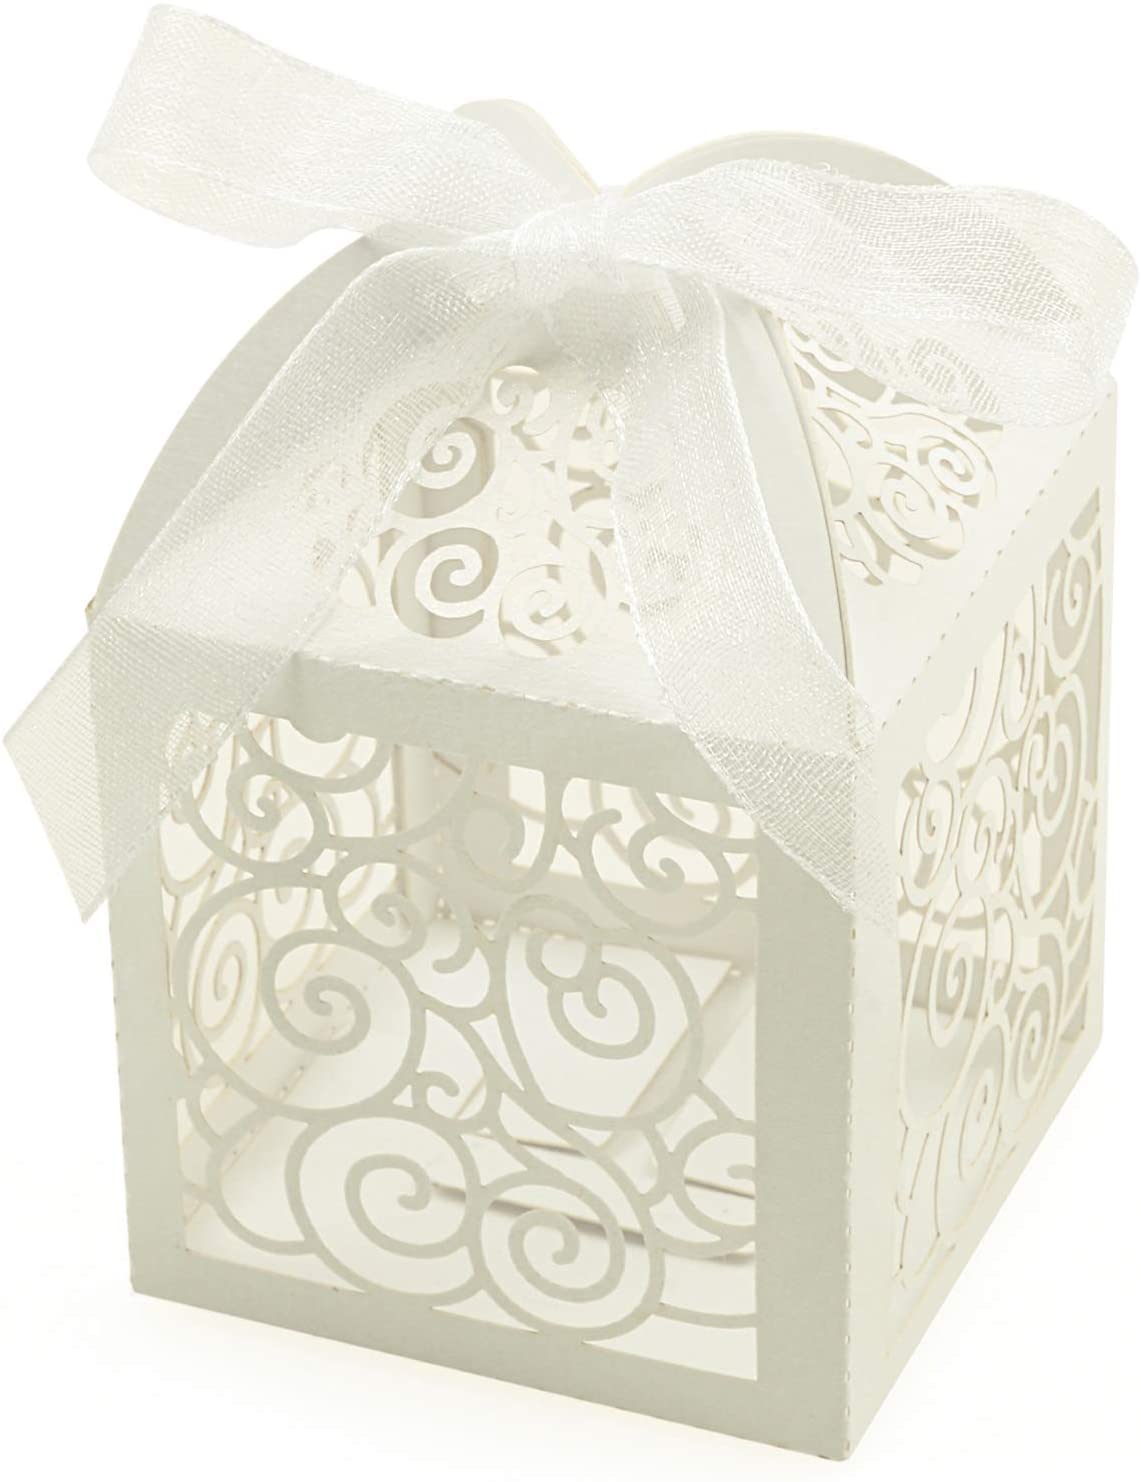 100 Pack Wedding Favor Boxes Laser Cut Boxes Party Favor Box Small Gift  Boxes Lace Candy Boxes for Wedding Bridal Shower Baby Shower Birthday Party